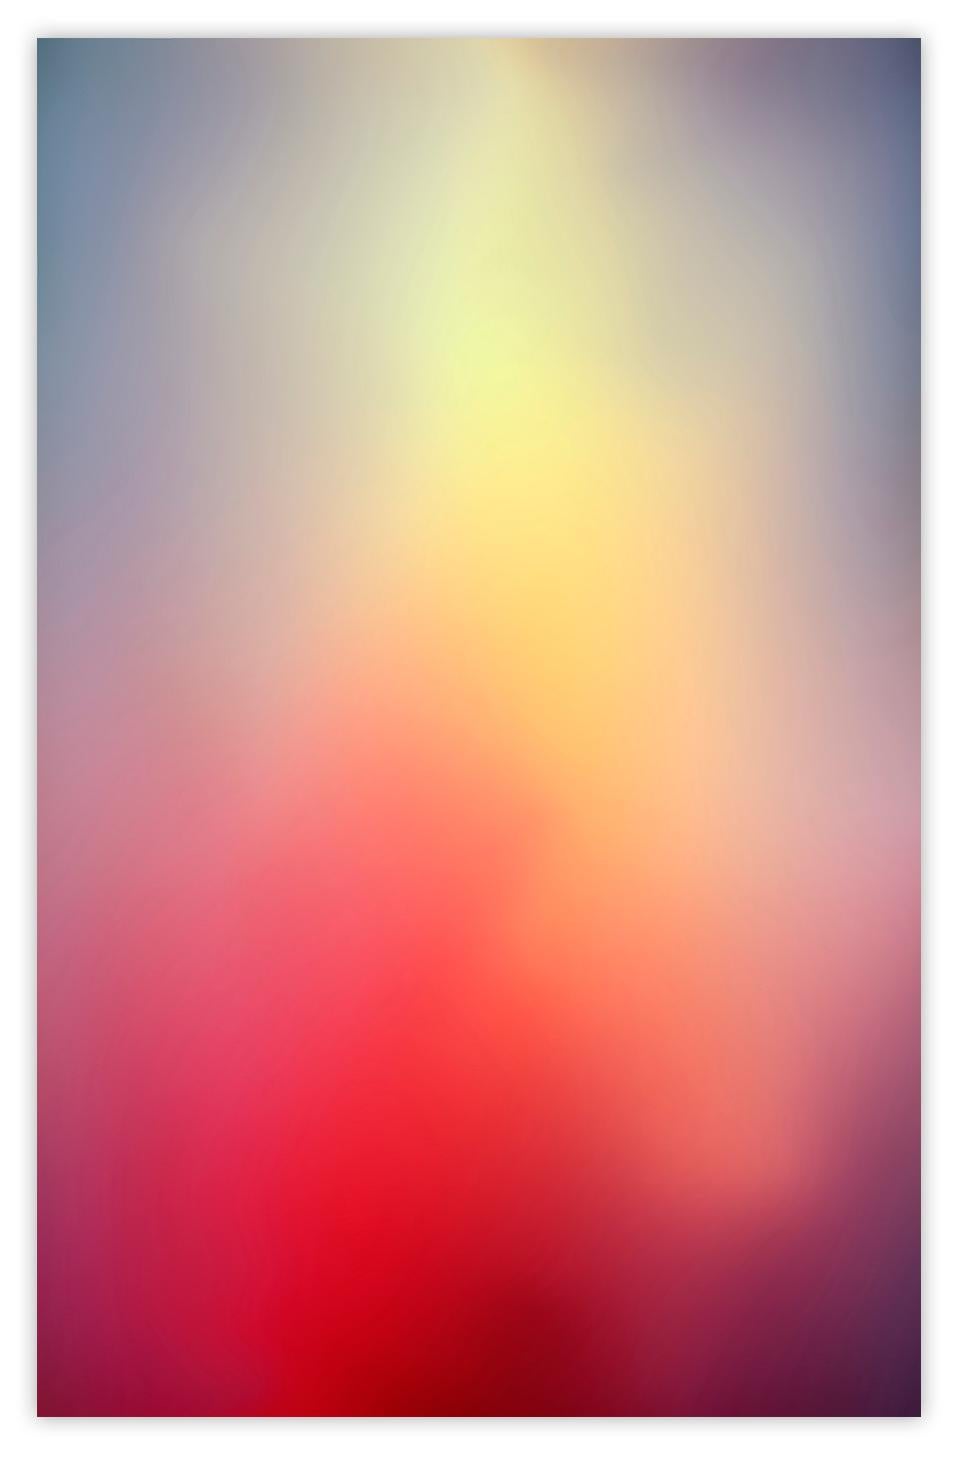 Abstract Photograph Paul Snell - Bleed # 202337 (Photographie abstraite)